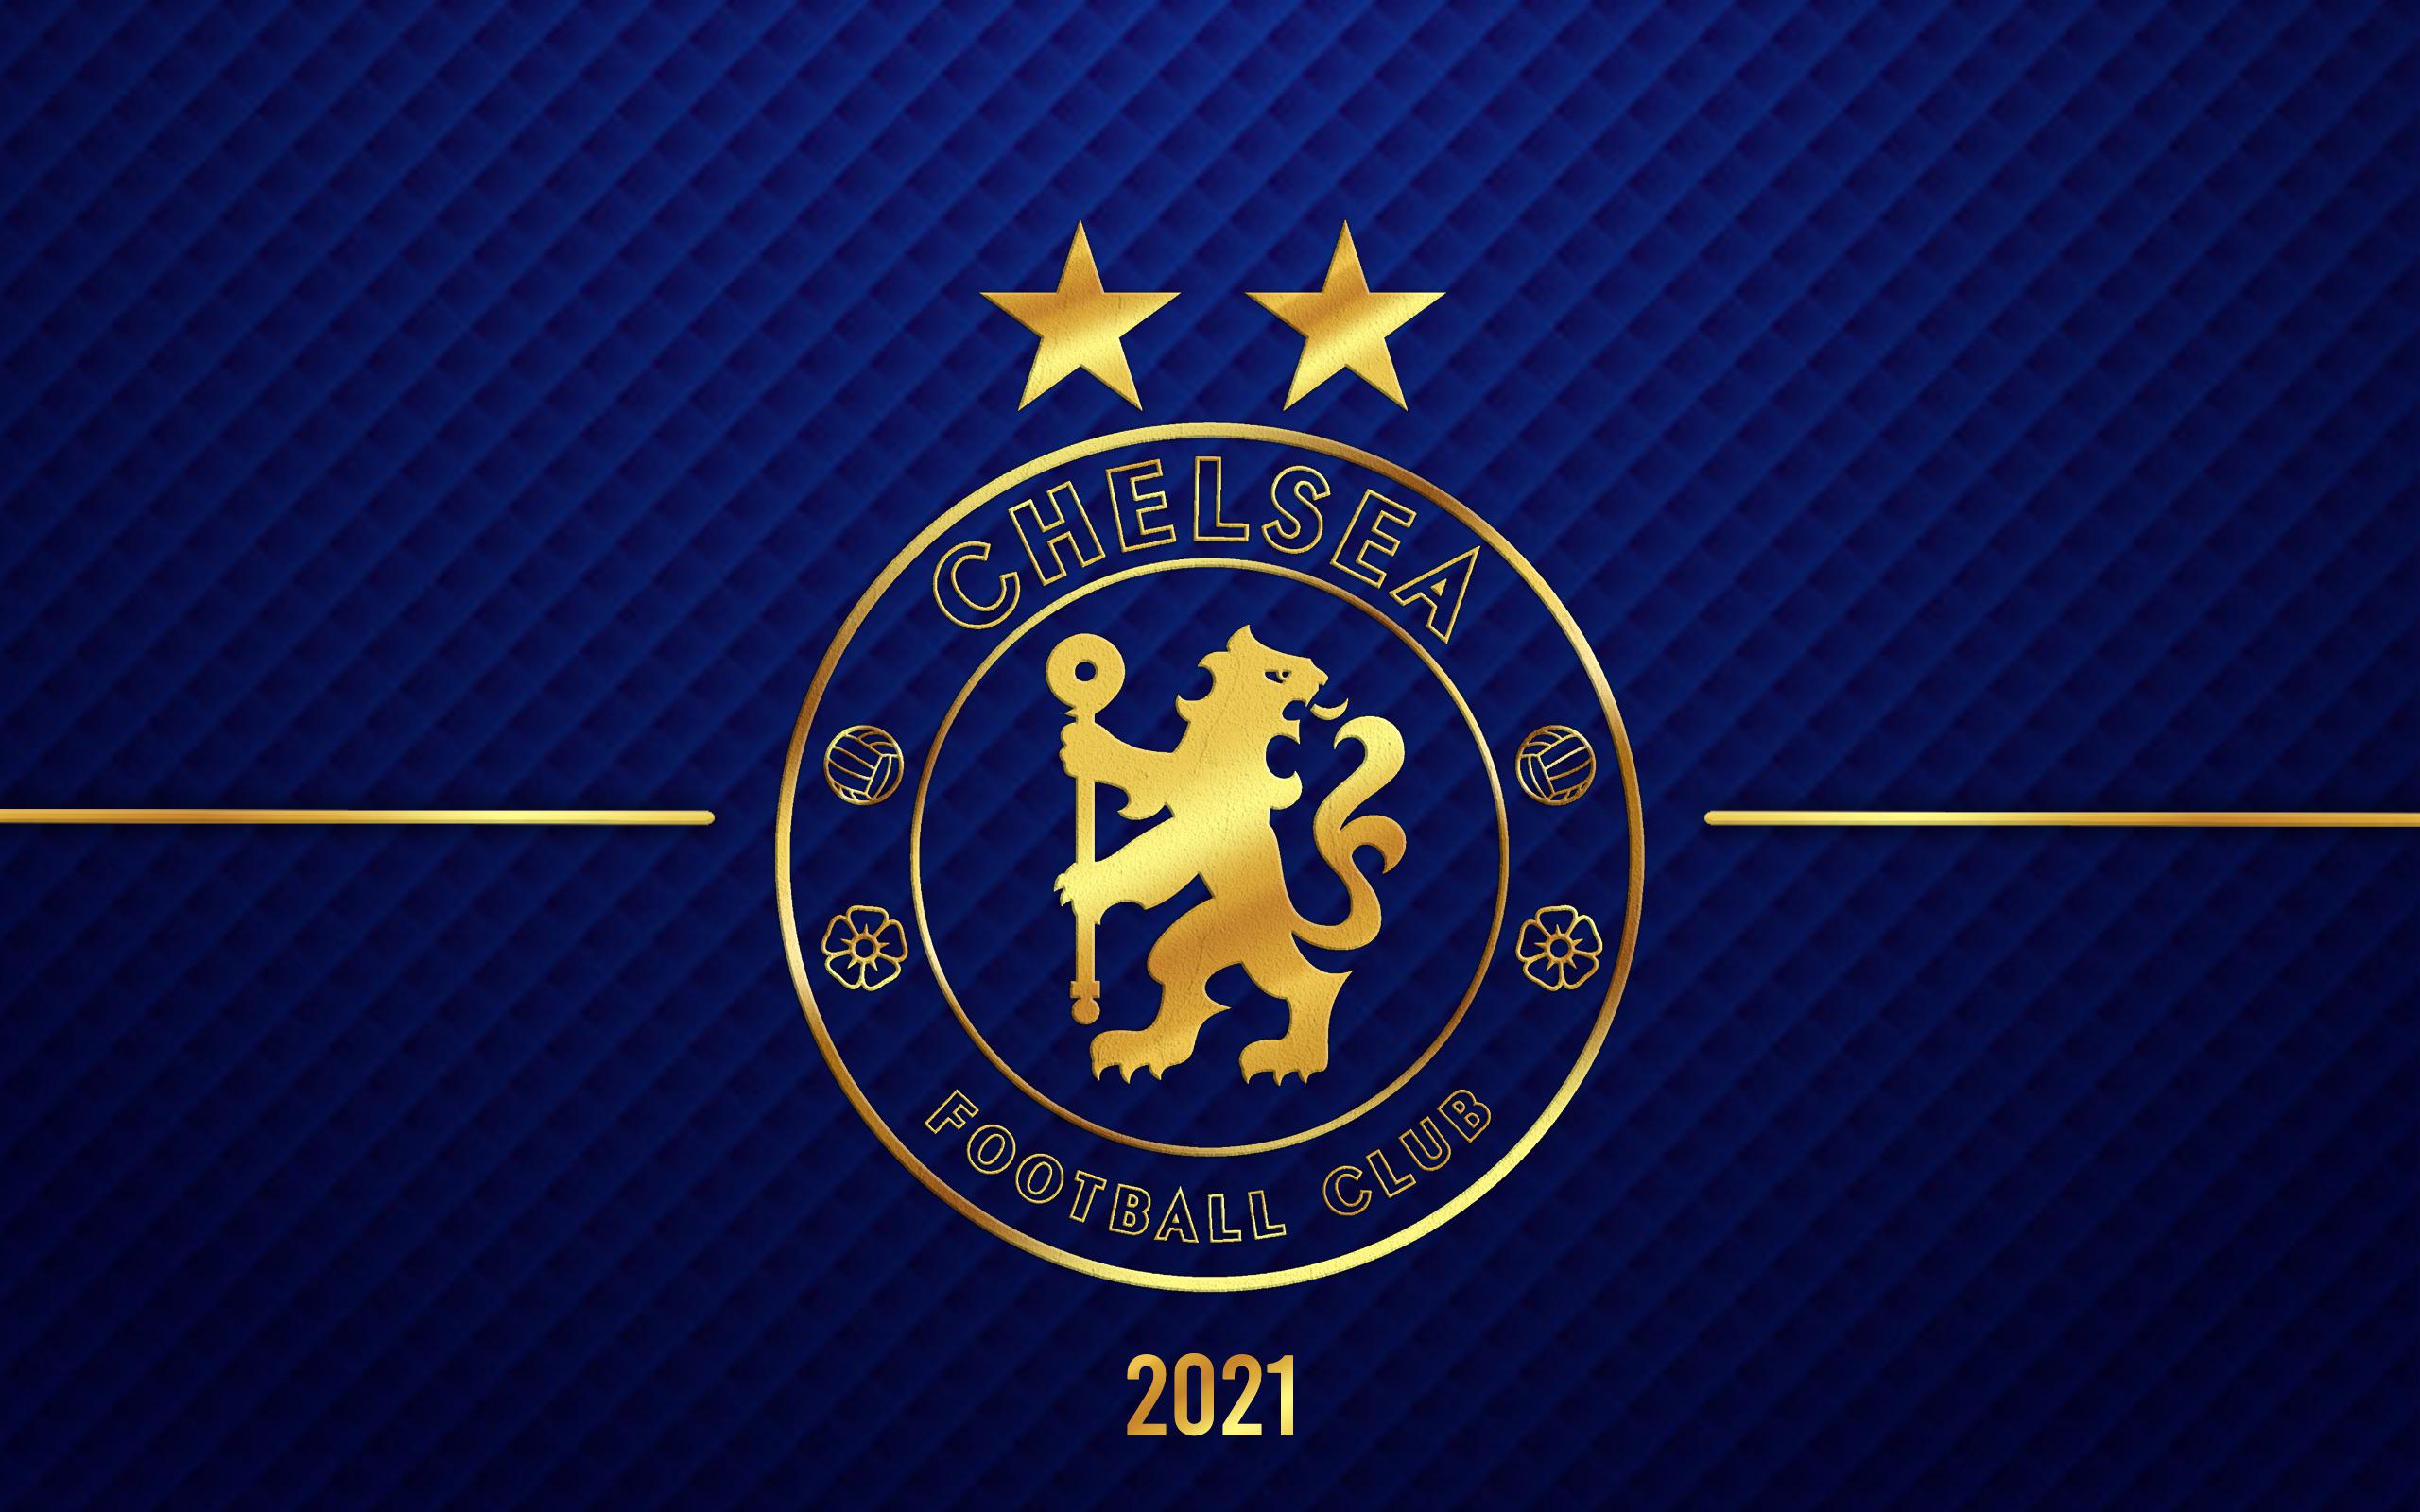 Chelsea Hintergrundbild 2560x1600. Made a desktop and phone wallpaper for the UCL champions!